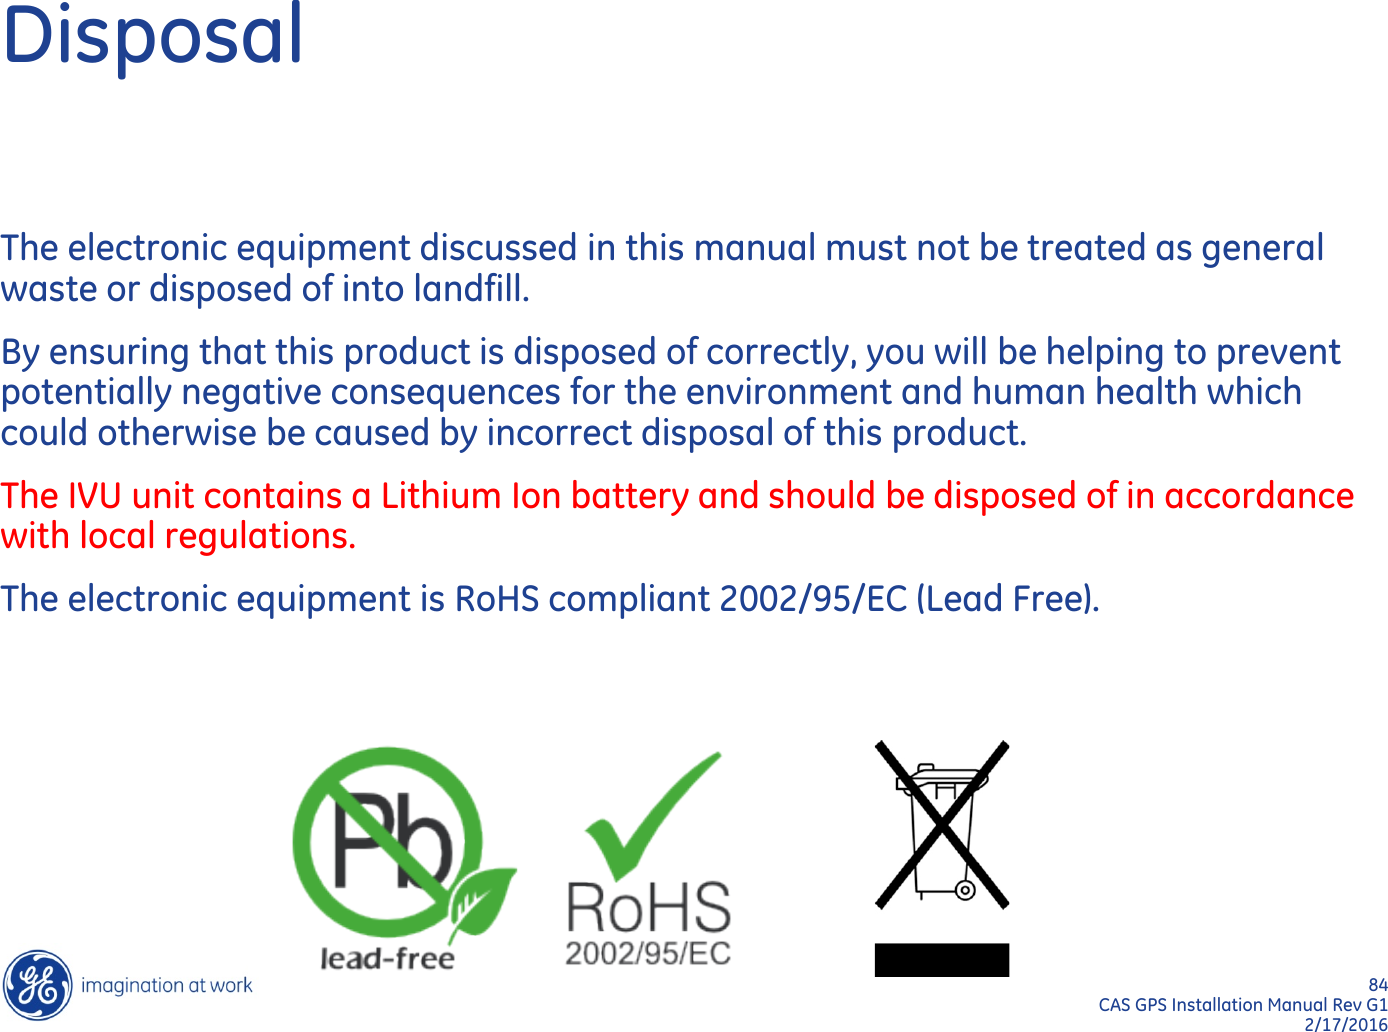 84  CAS GPS Installation Manual Rev G1 2/17/2016 Disposal The electronic equipment discussed in this manual must not be treated as general waste or disposed of into landfill. By ensuring that this product is disposed of correctly, you will be helping to prevent potentially negative consequences for the environment and human health which could otherwise be caused by incorrect disposal of this product. The IVU unit contains a Lithium Ion battery and should be disposed of in accordance with local regulations. The electronic equipment is RoHS compliant 2002/95/EC (Lead Free).  